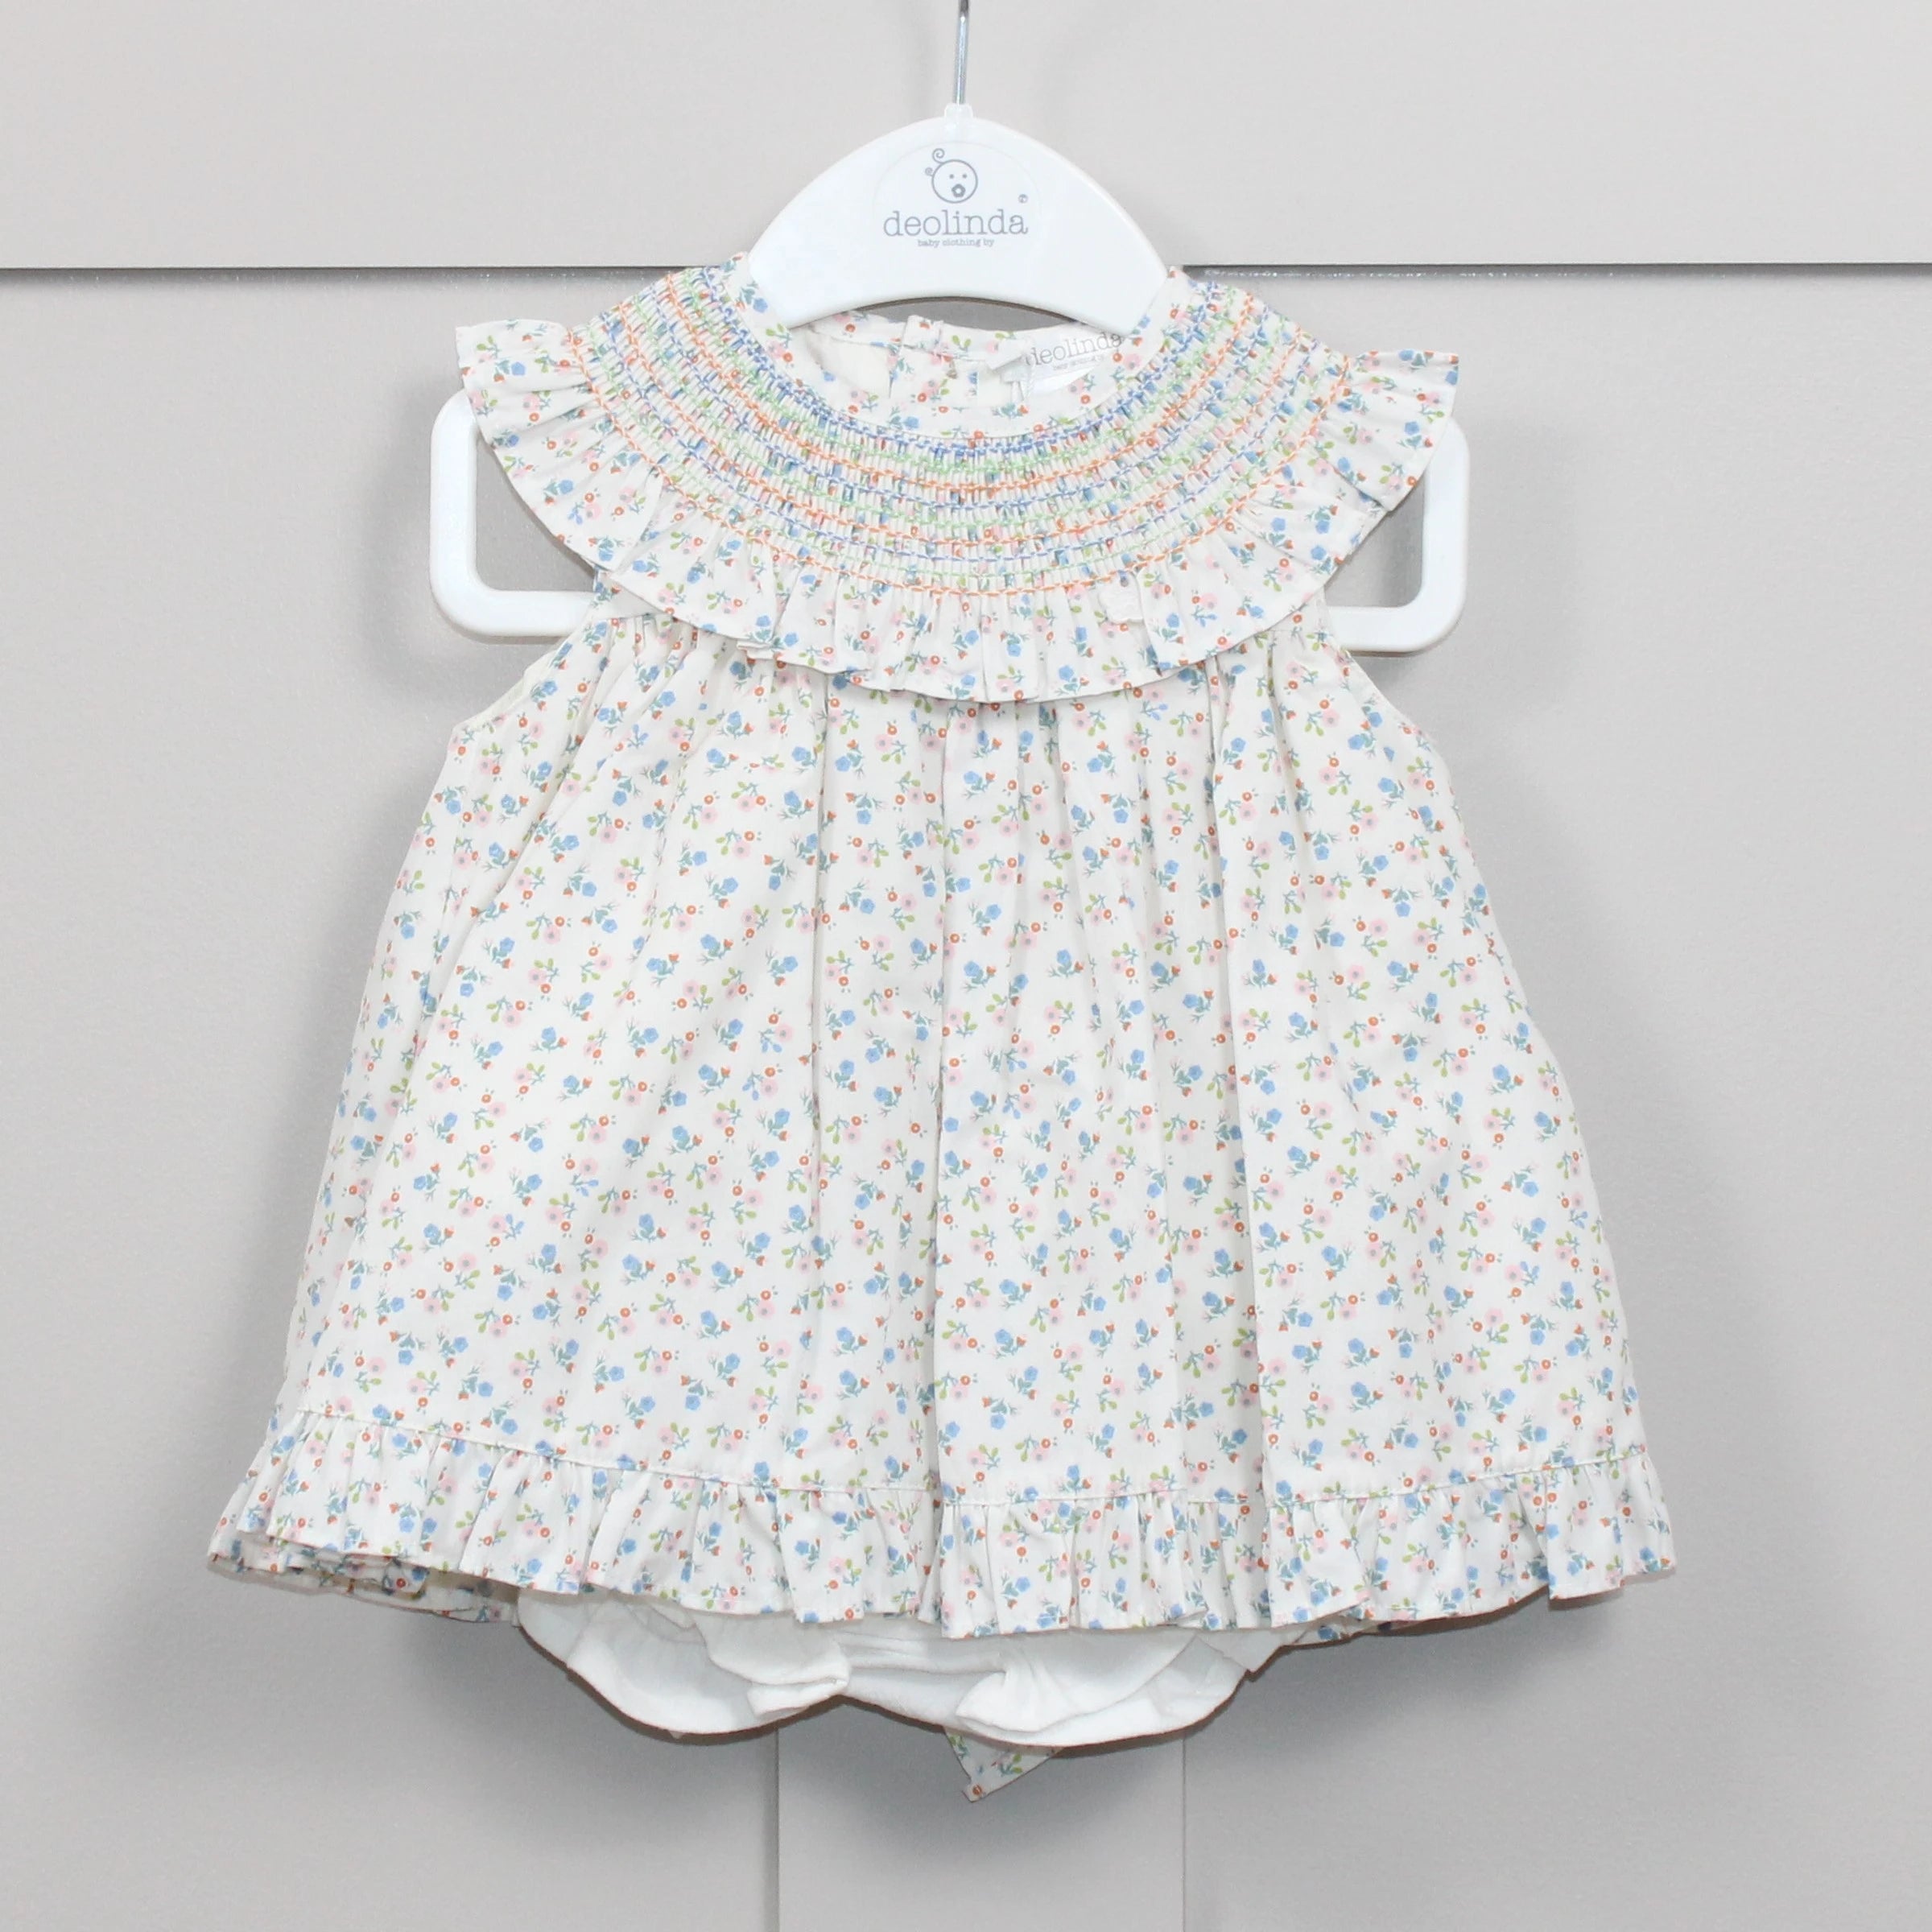 deolinda trinity dress and bloomers 